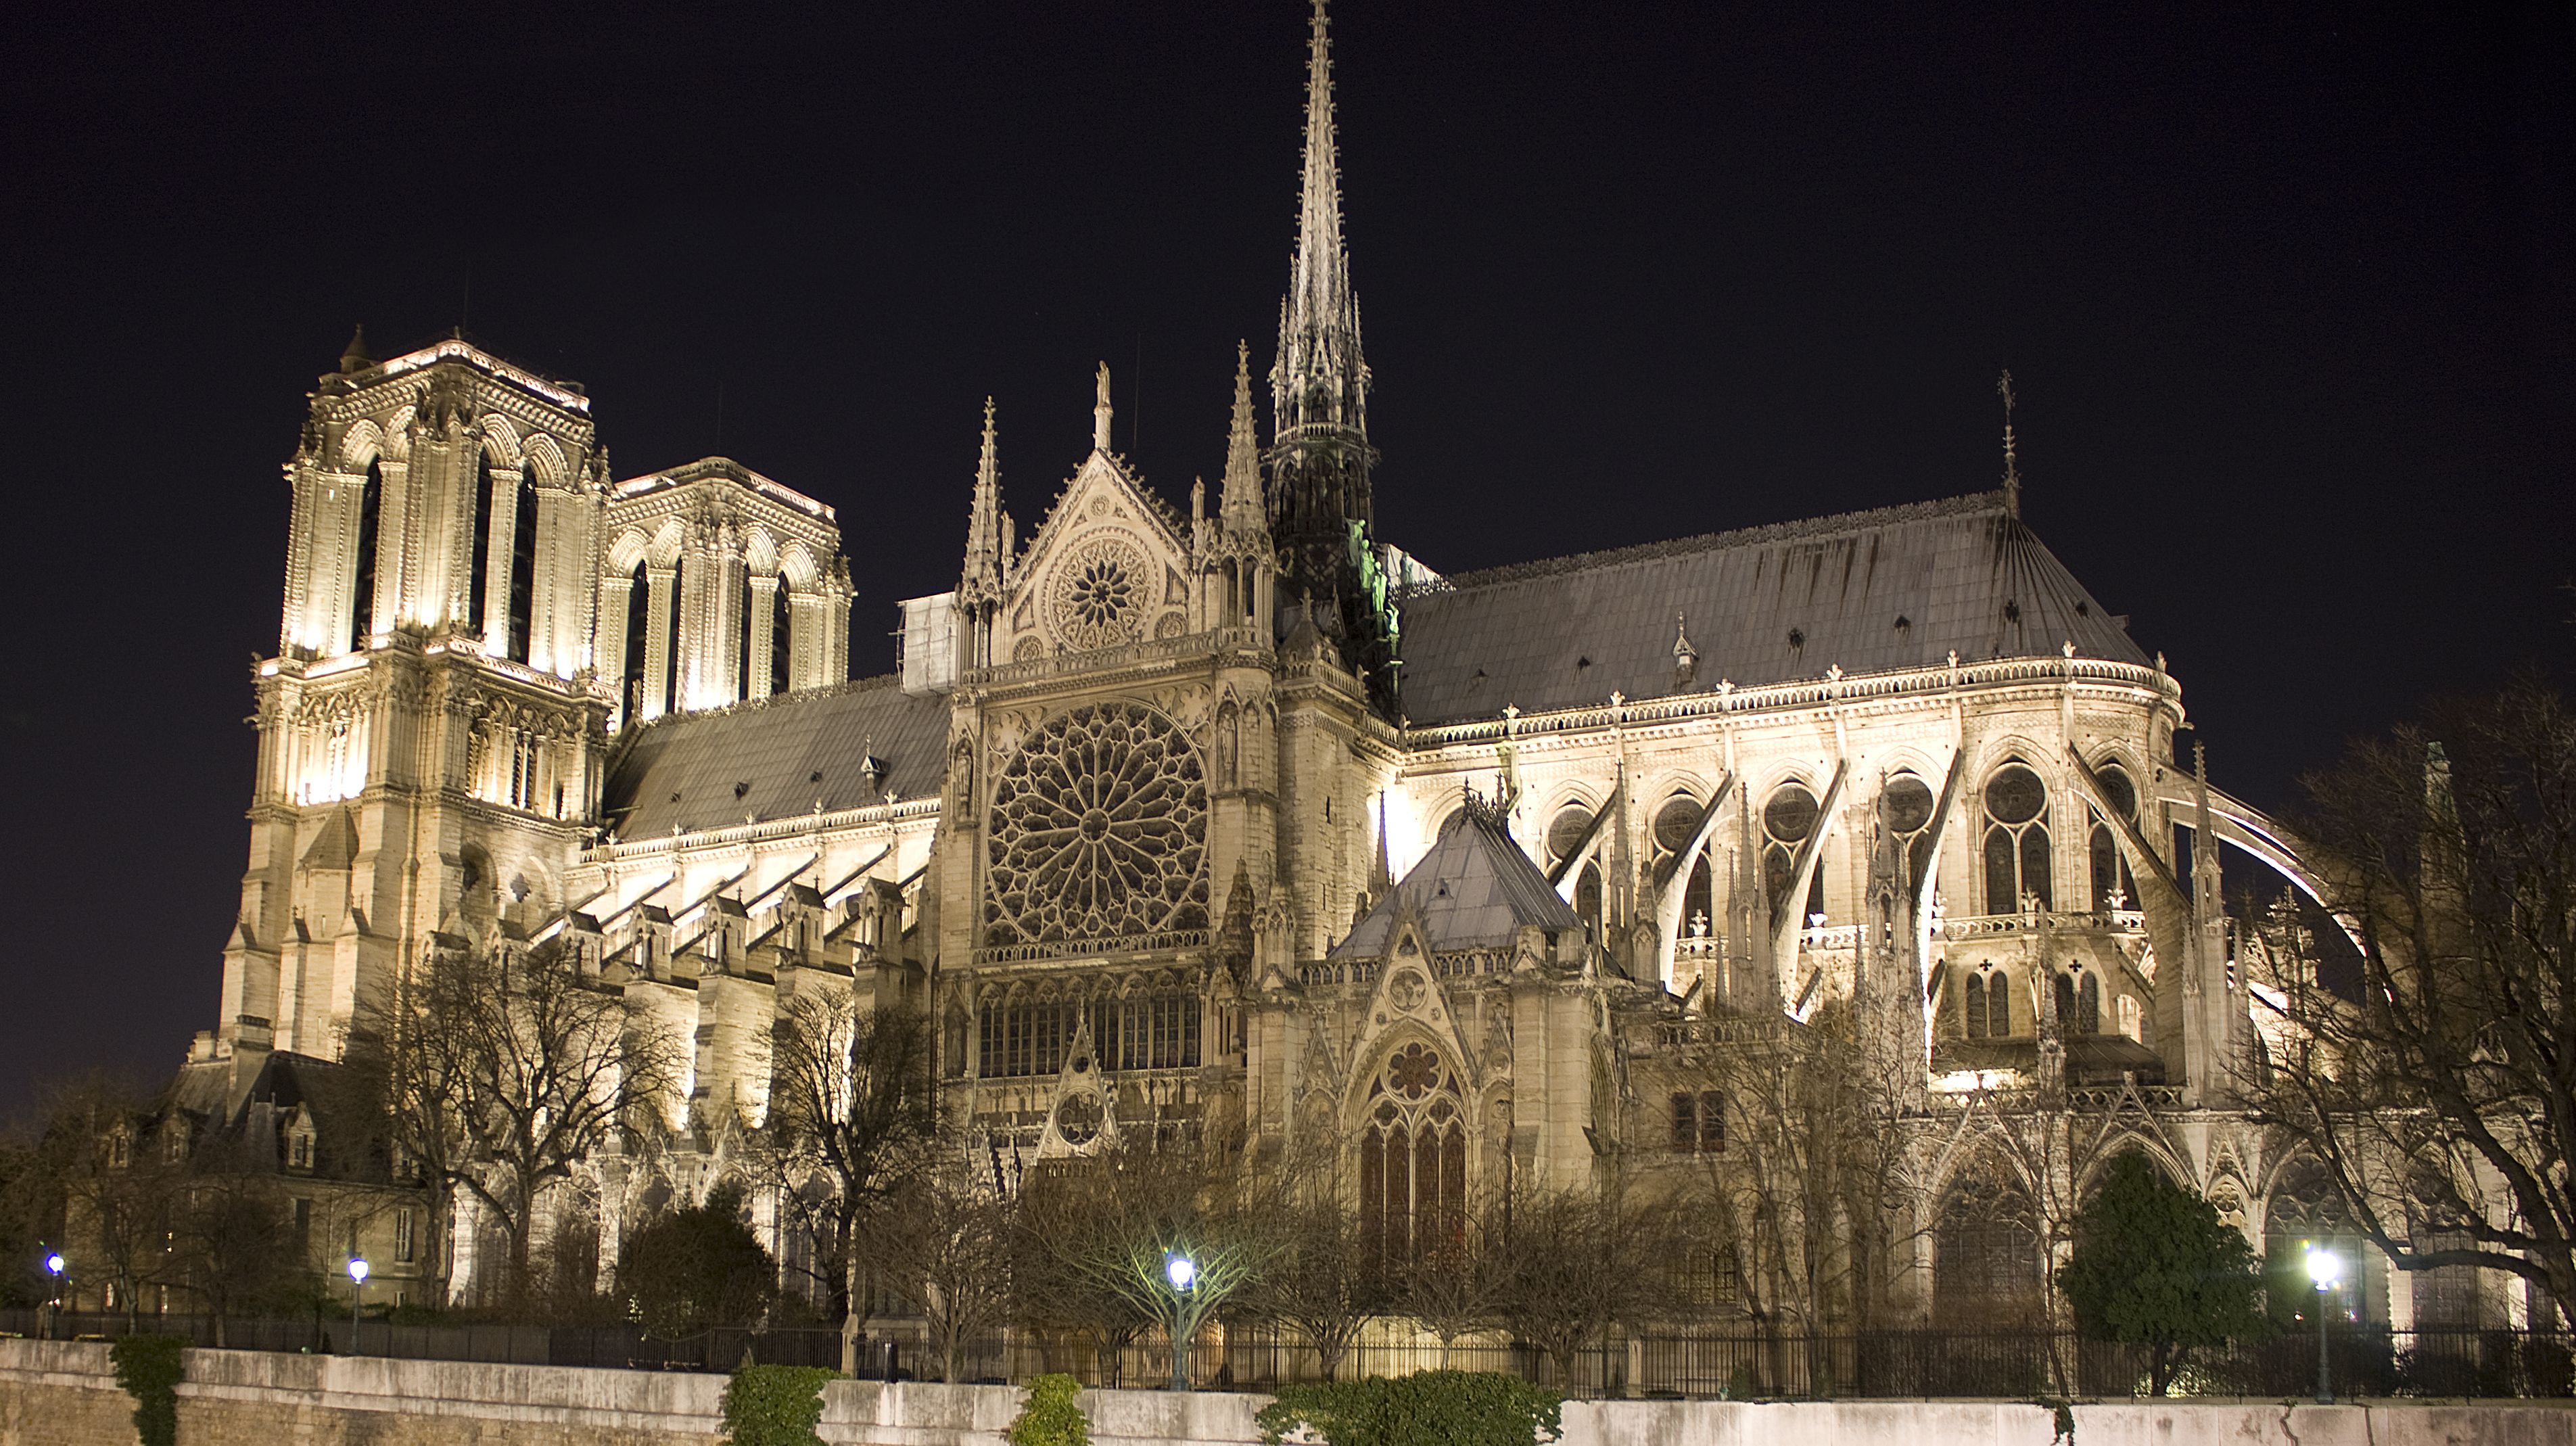 A view of Notre-Dame de Paris in France with lights during evening time